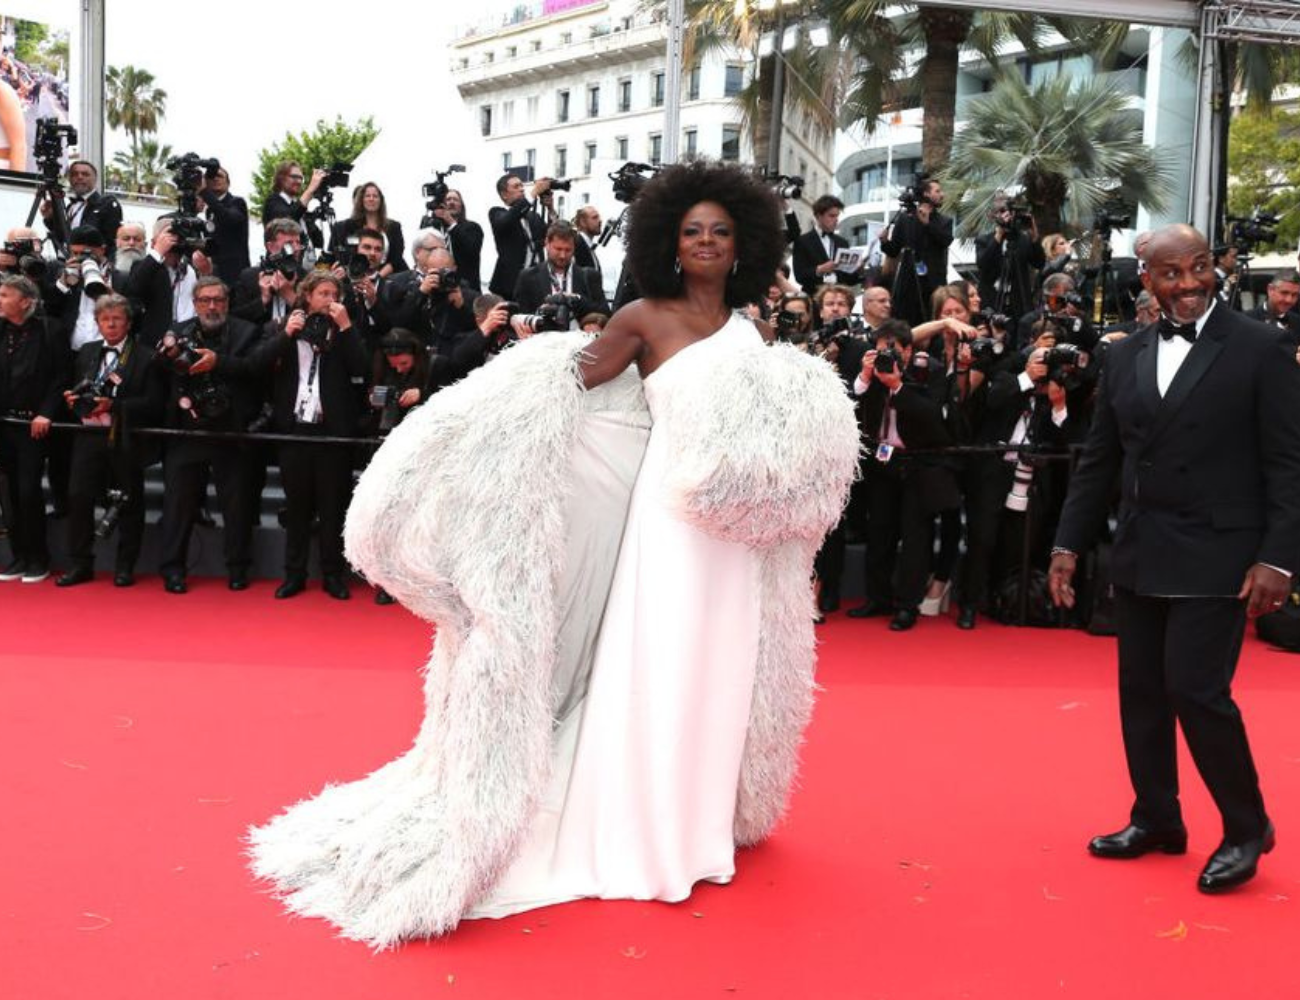 Cannes Film Festival Week 1: The Best Dressed